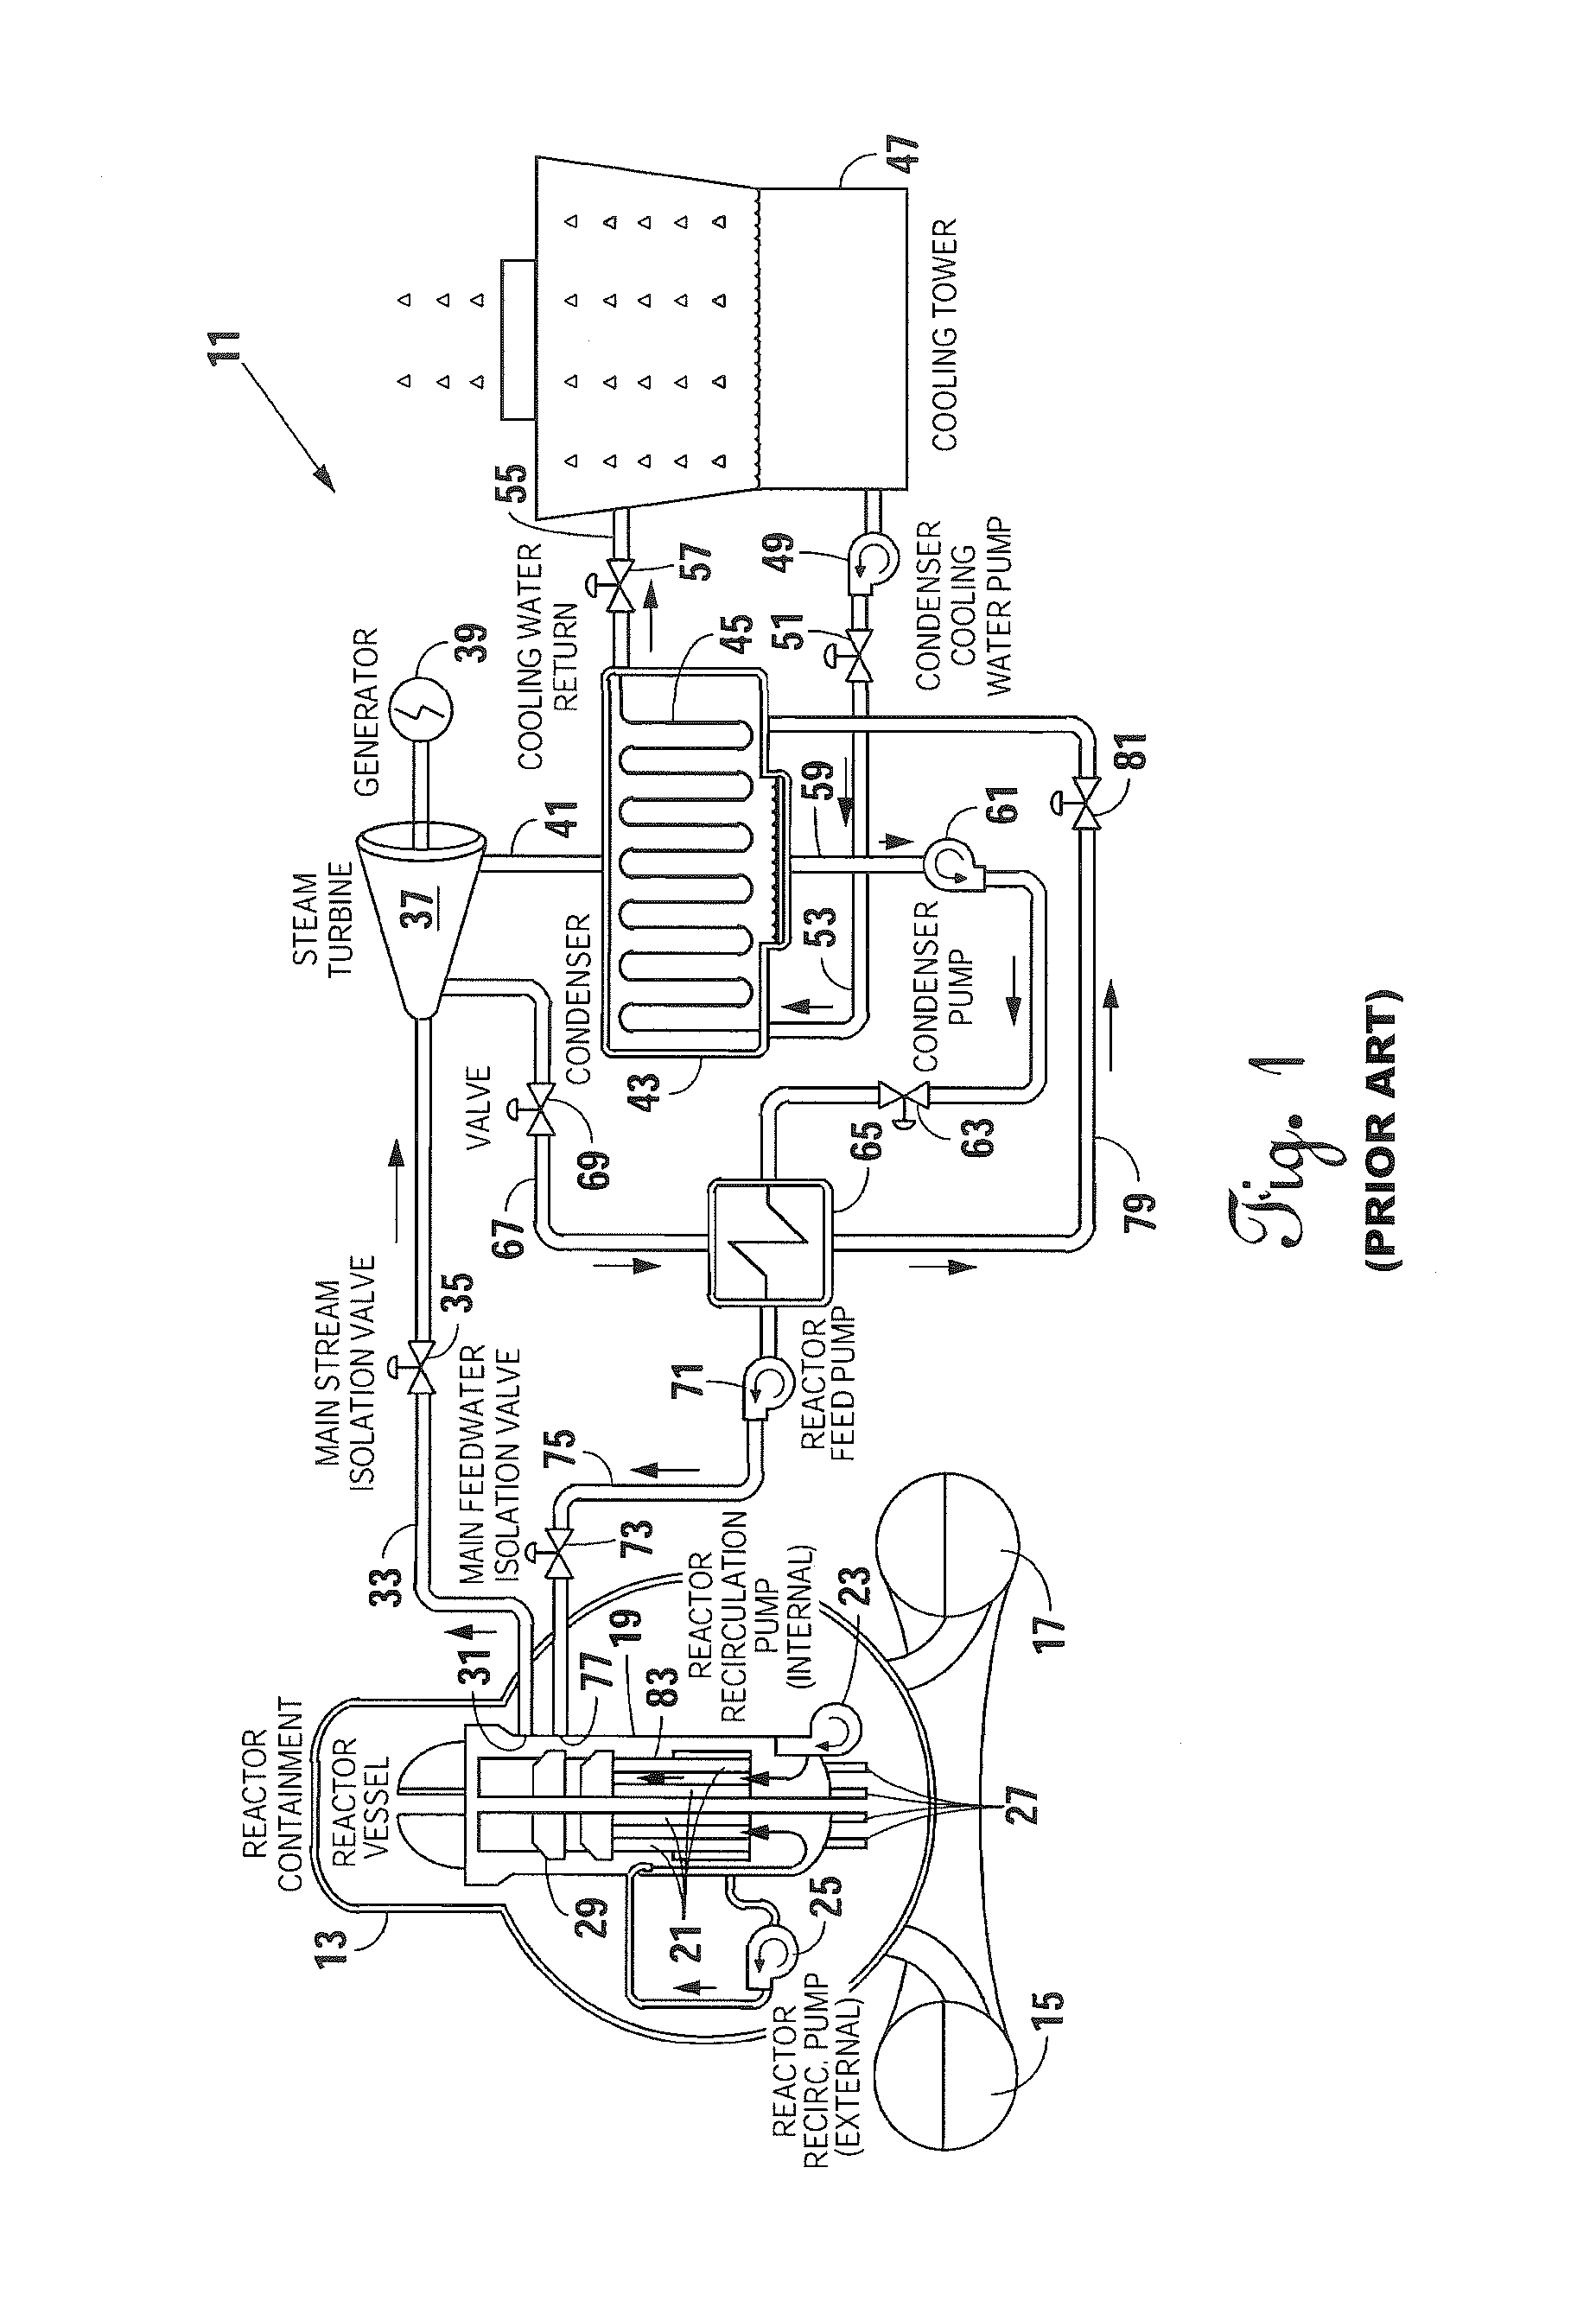 Method and apparatus of inspecting the upper core shroud of a nuclear reactor vessel